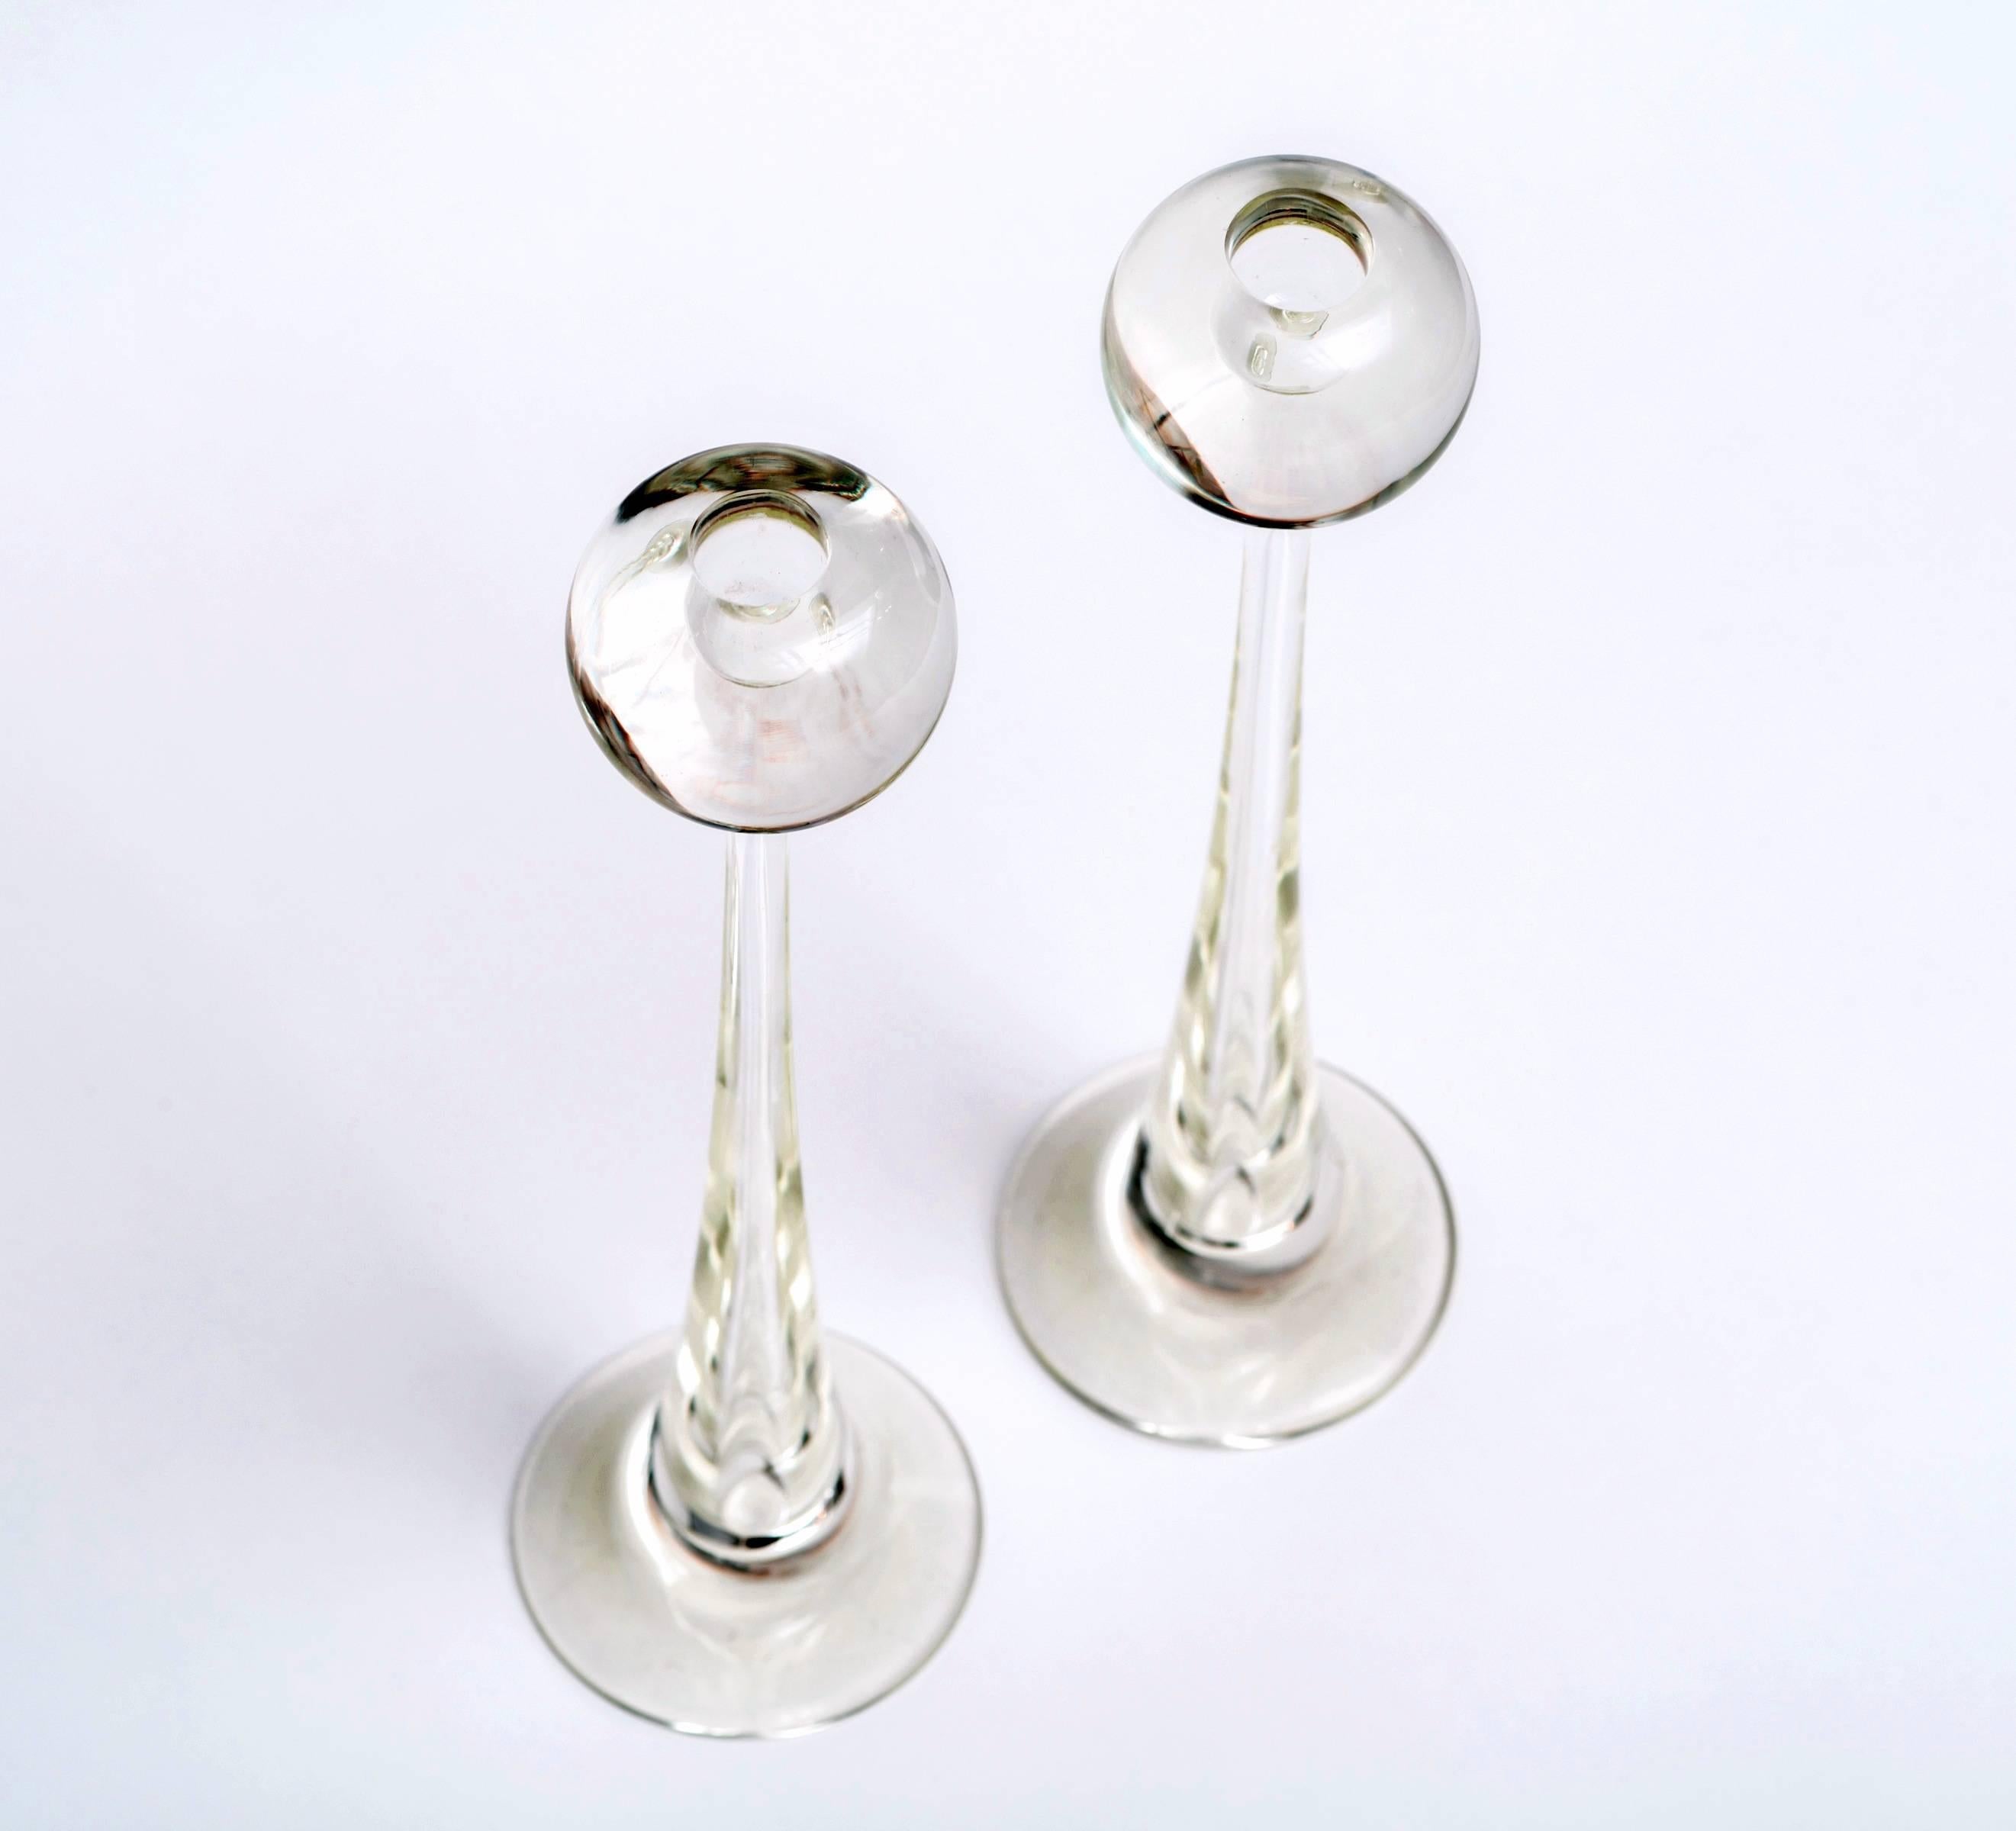 Fabulous pair of Murano clear glass ball candlesticks by Cenedese. This extra tall size is perfect for mixing with other candlesticks and are very unique with the large chunky ball top flairing into a round bottom. Great scale!

Note the glass